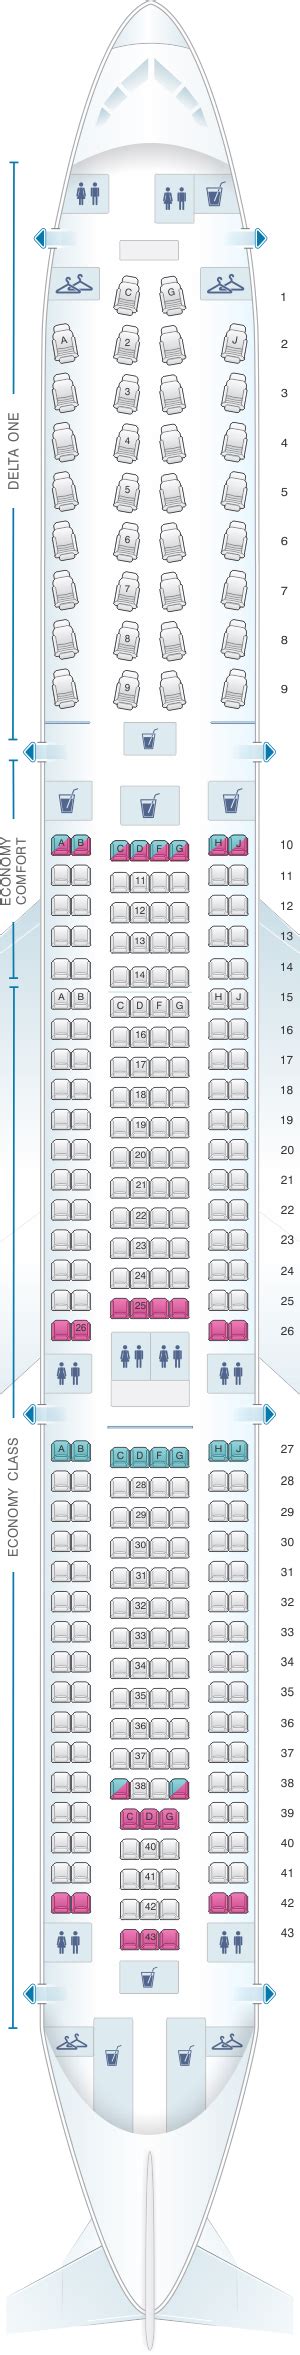 Seat Map Delta Airlines Airbus A330 300 333